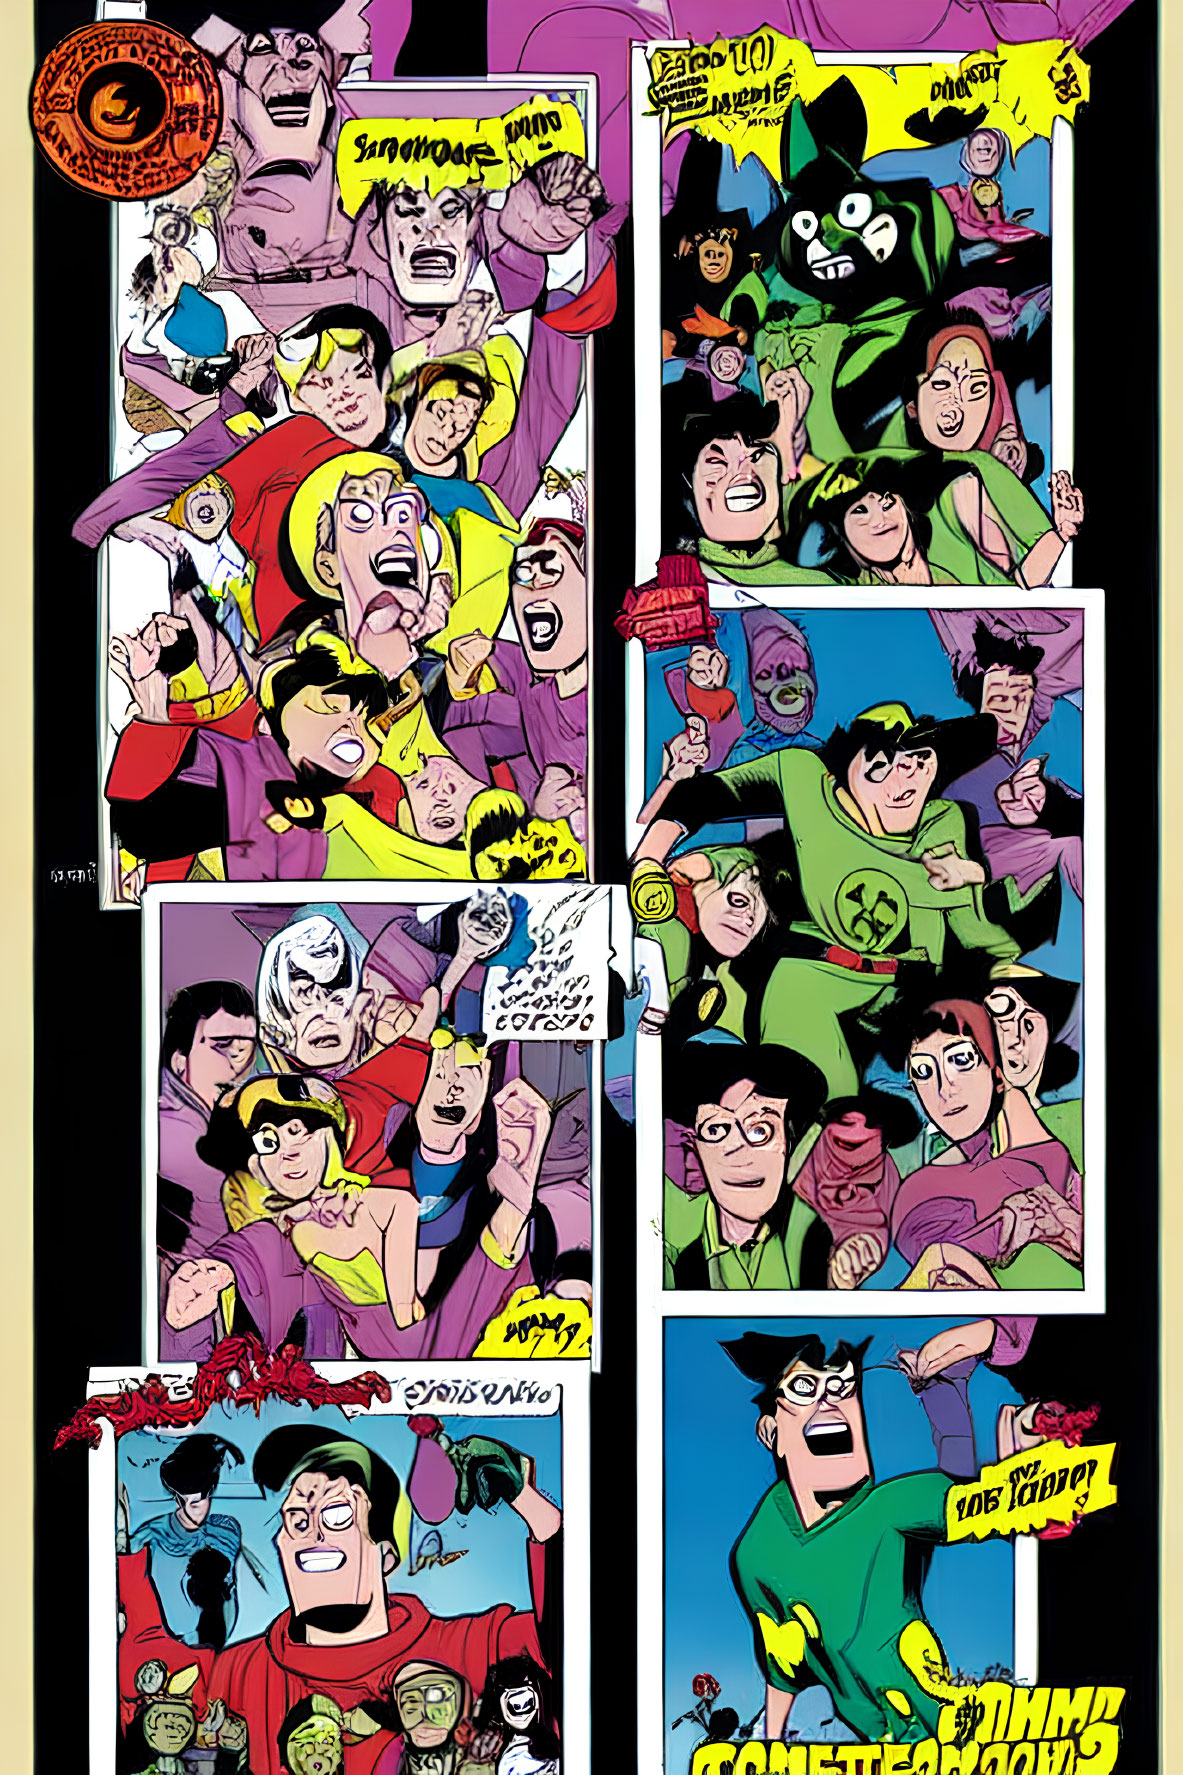 Colorful Comic Strip Page with Exaggerated Expressions and Humorous Antics